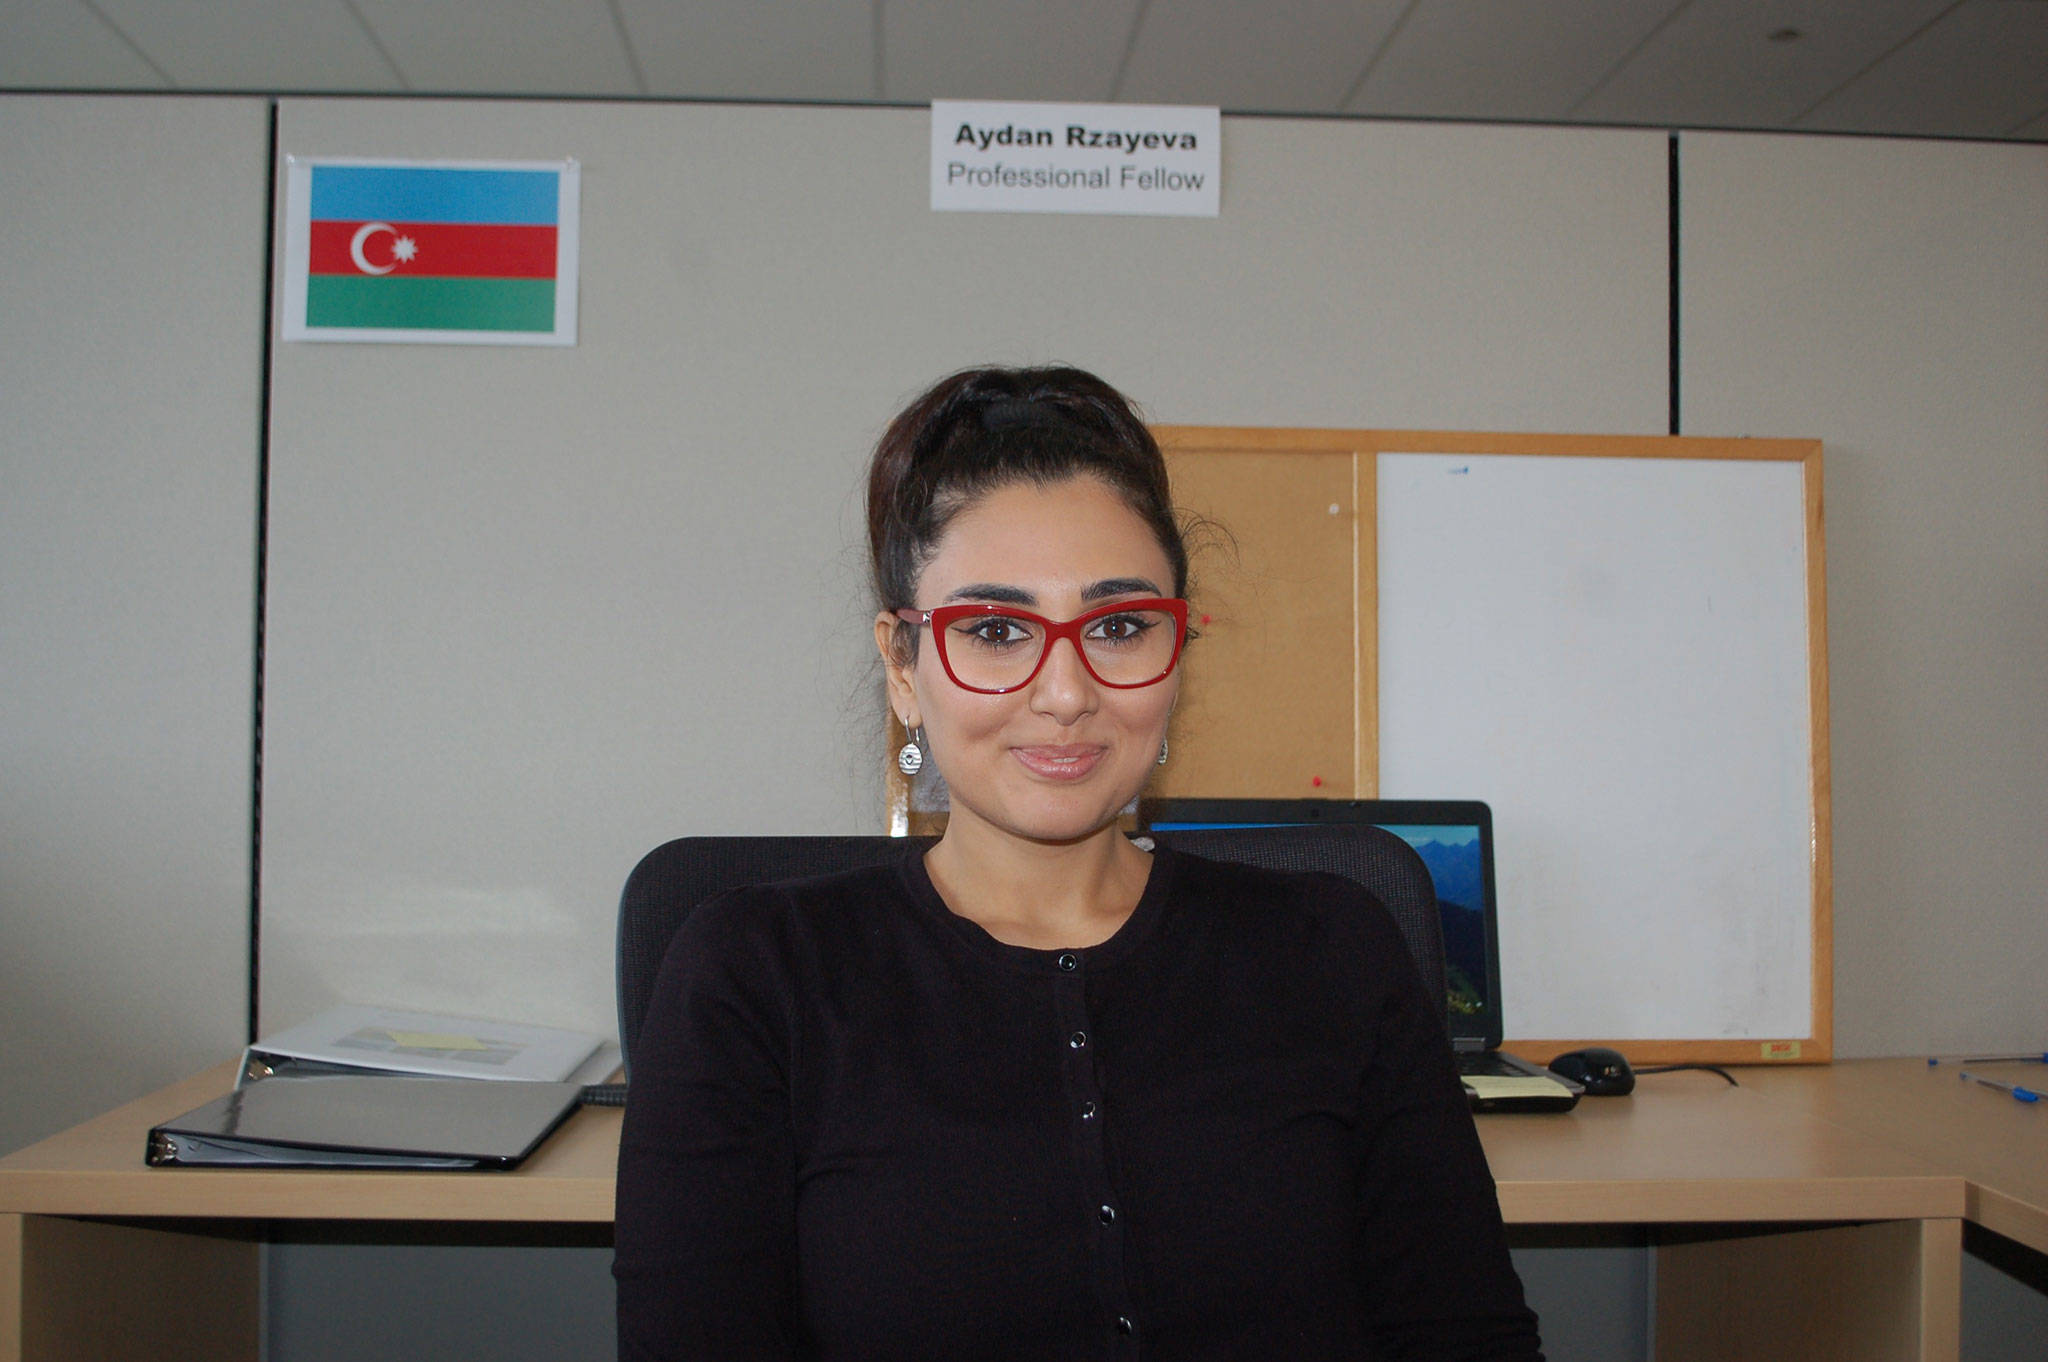 Aydan Rzayeva is the selected Professional Fellow from Azerbaijan who will be working with the City of Sequim and living with local host families from Oct. 13-Nov. 13. Sequim Gazette photo by Erin Hawkins